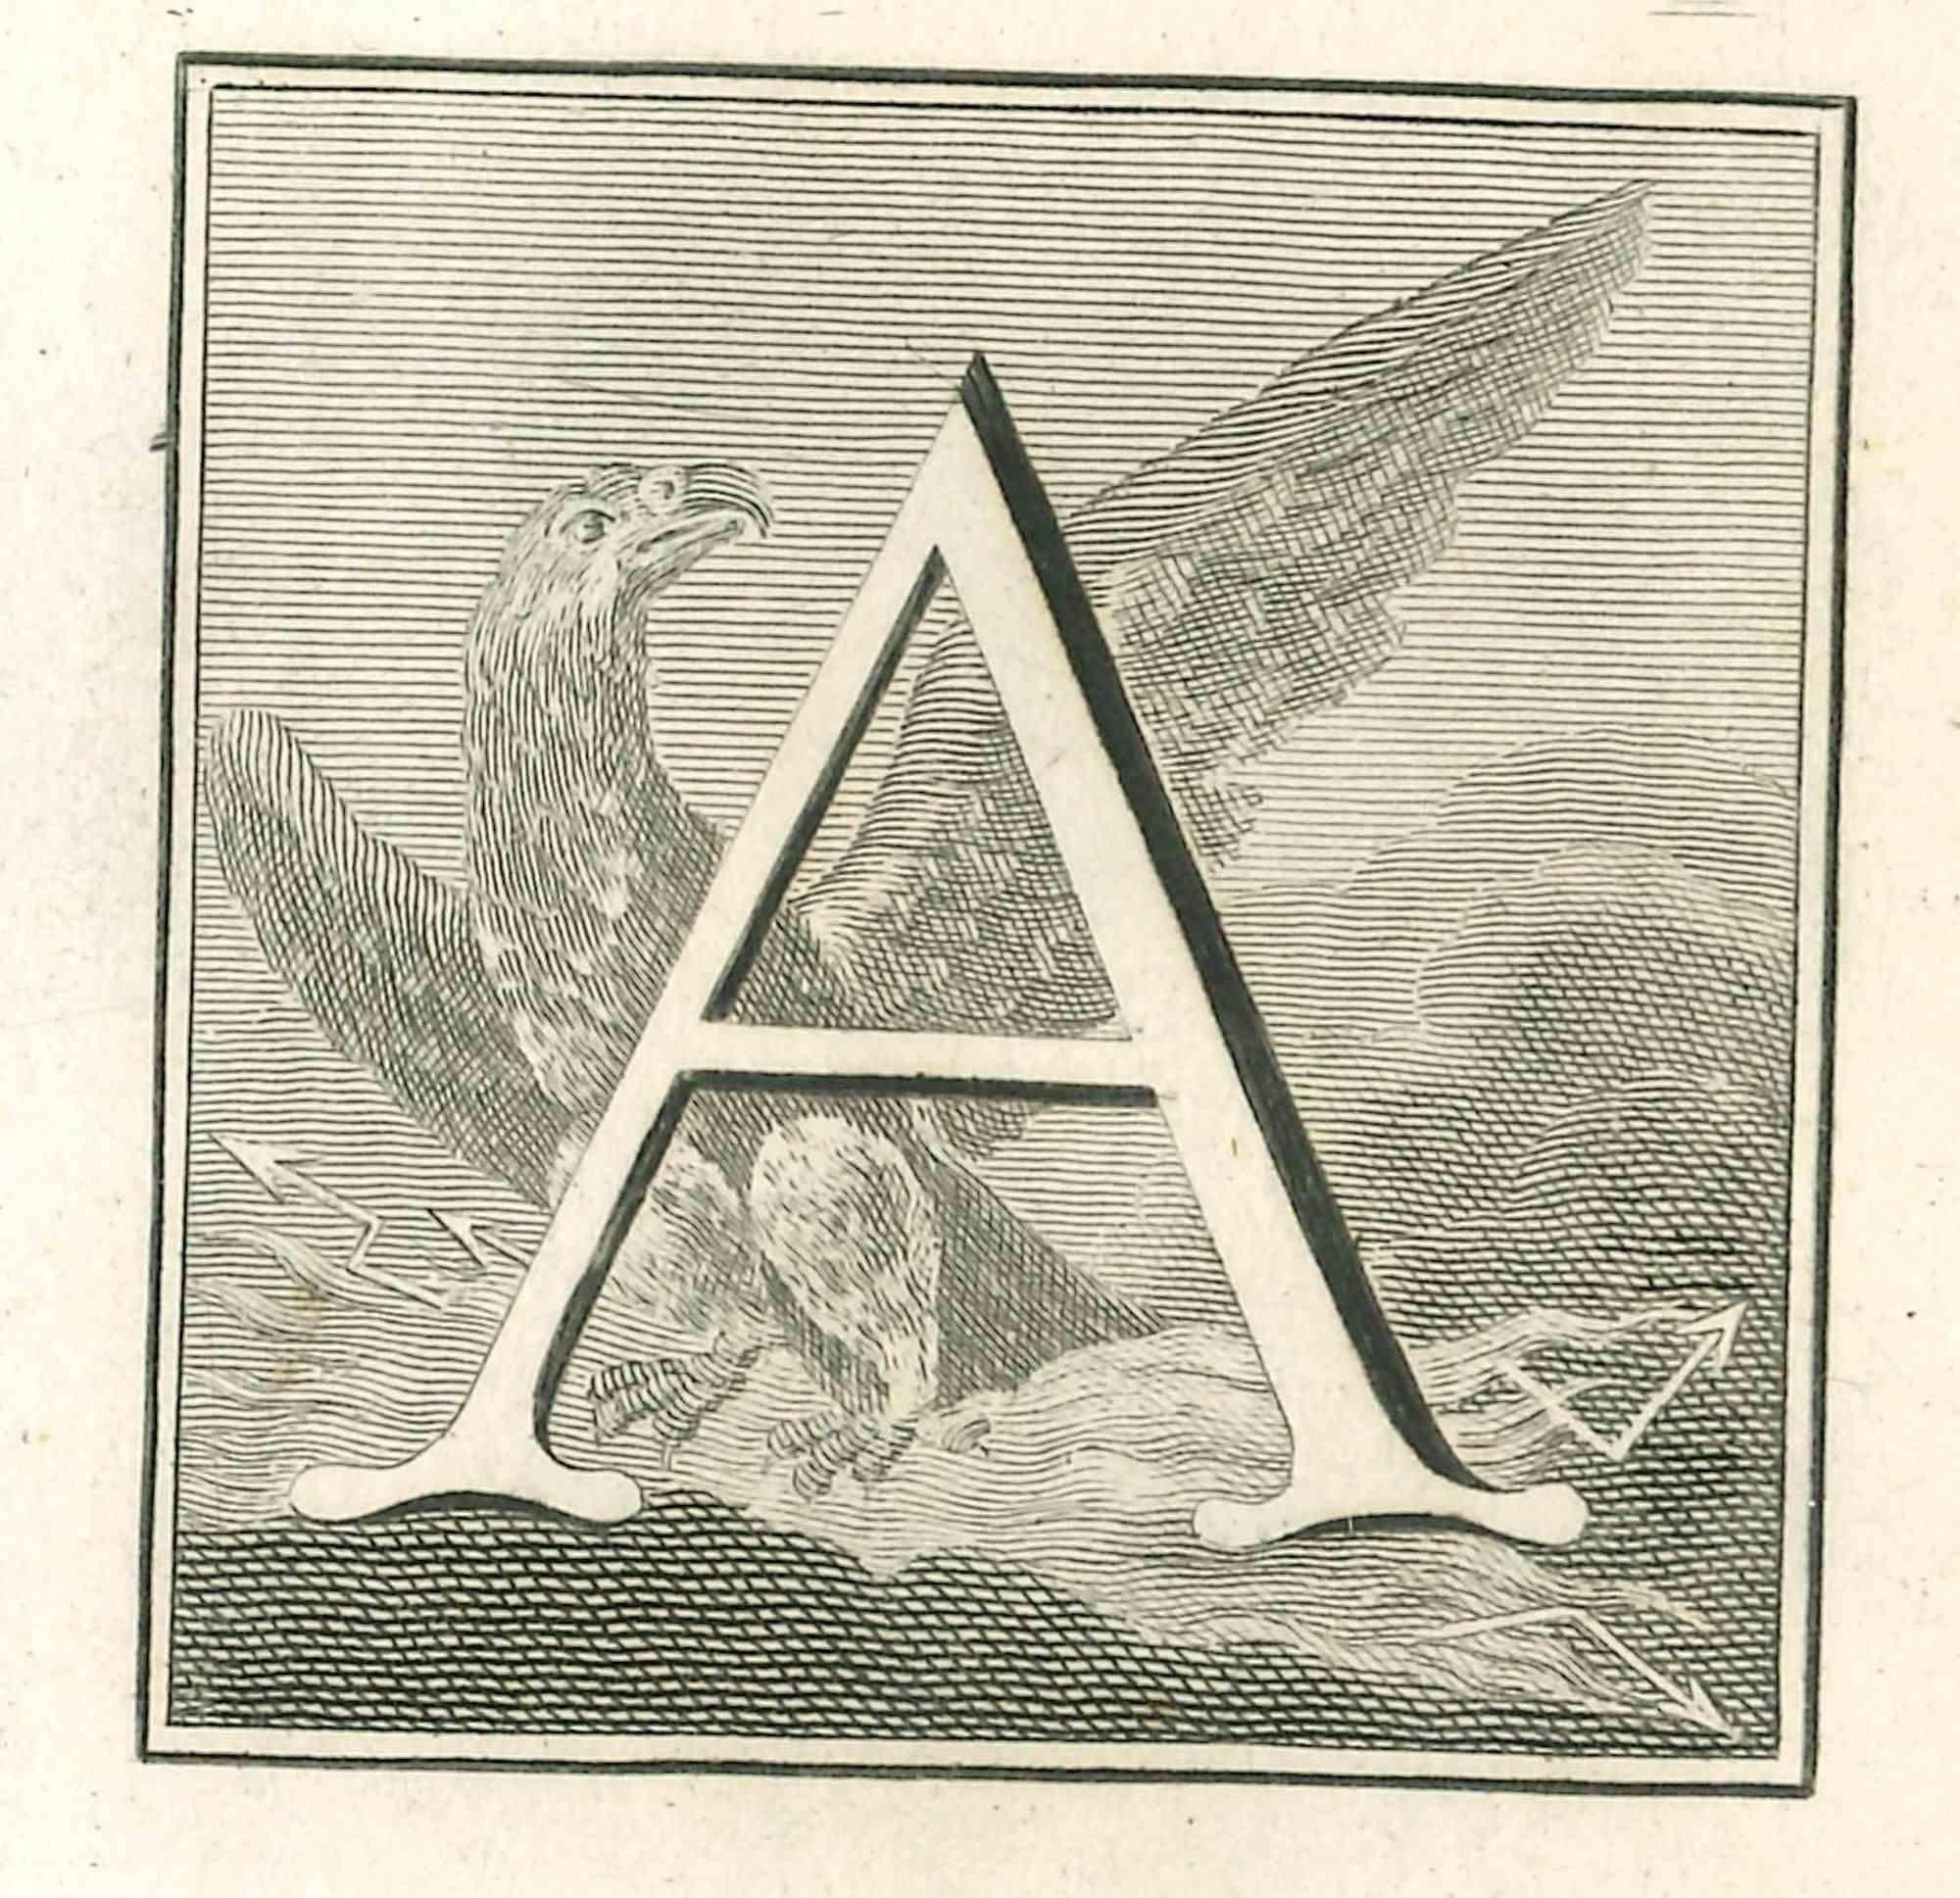 Letter of the Alphabet A,  from the series "Antiquities of Herculaneum", is an etching on paper realized by Luigi Vanvitelli in the 18th century.

Good conditions.

The etching belongs to the print suite “Antiquities of Herculaneum Exposed”